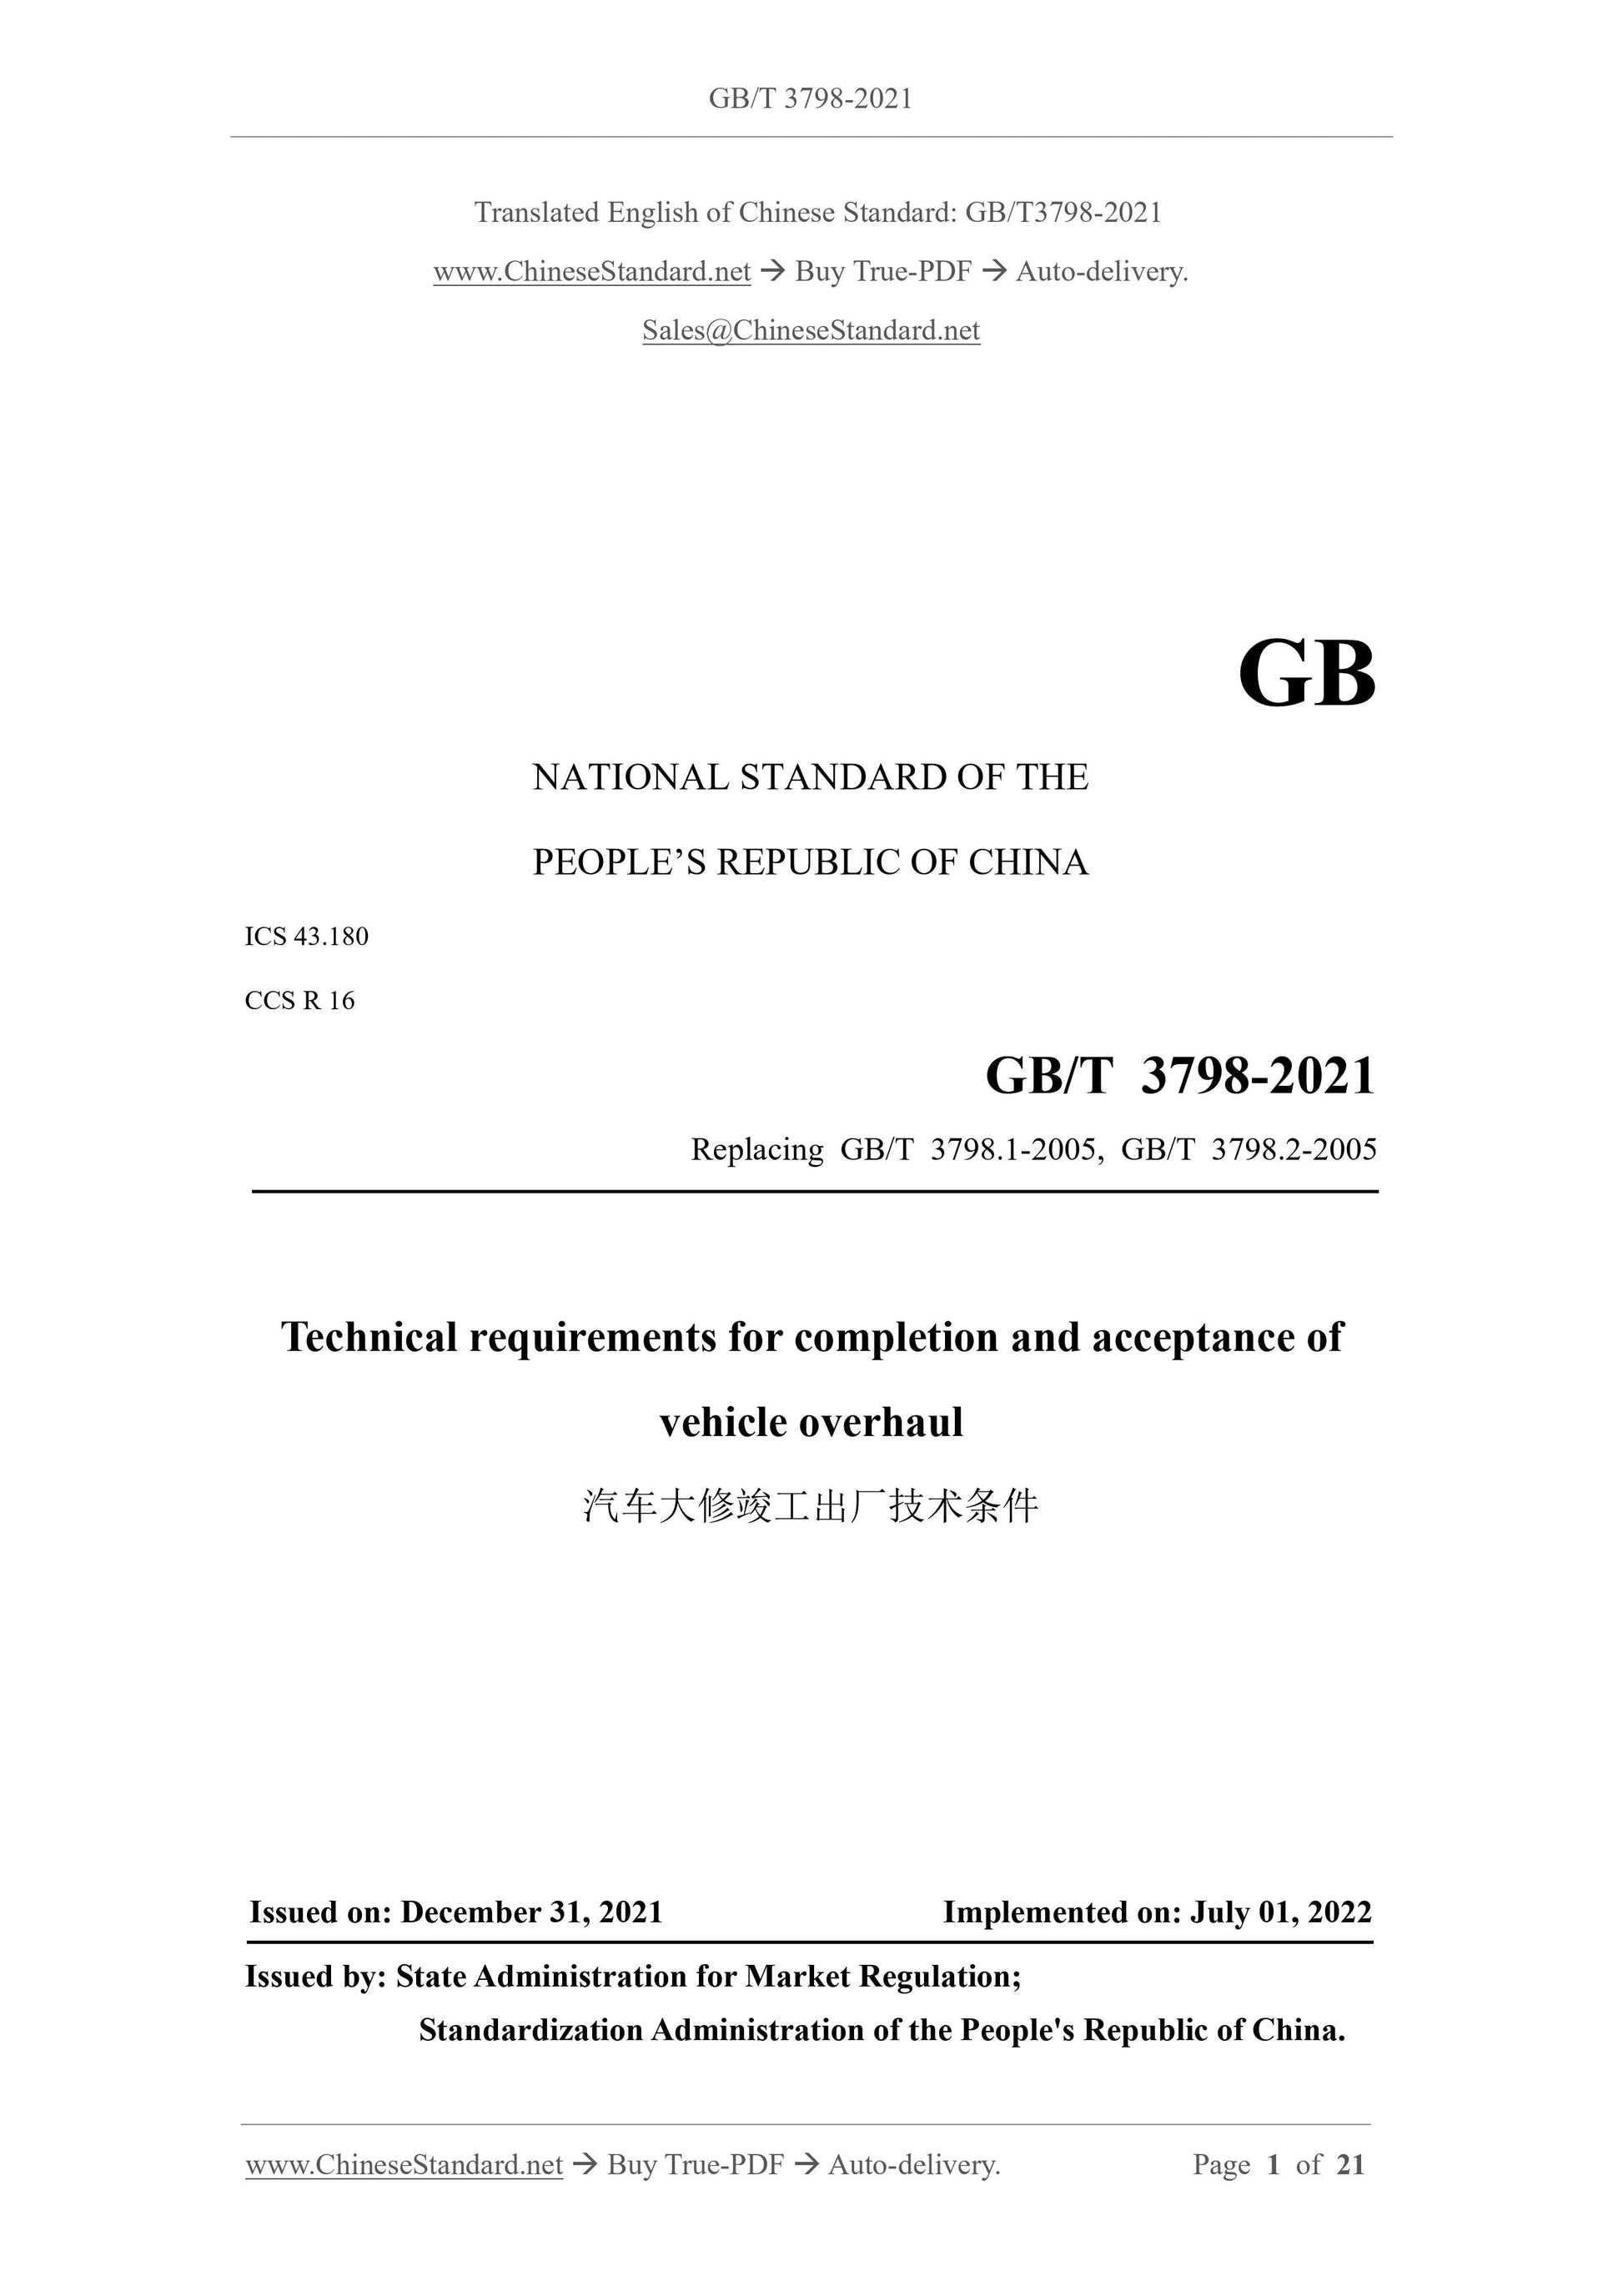 GB/T 3798-2021 Page 1